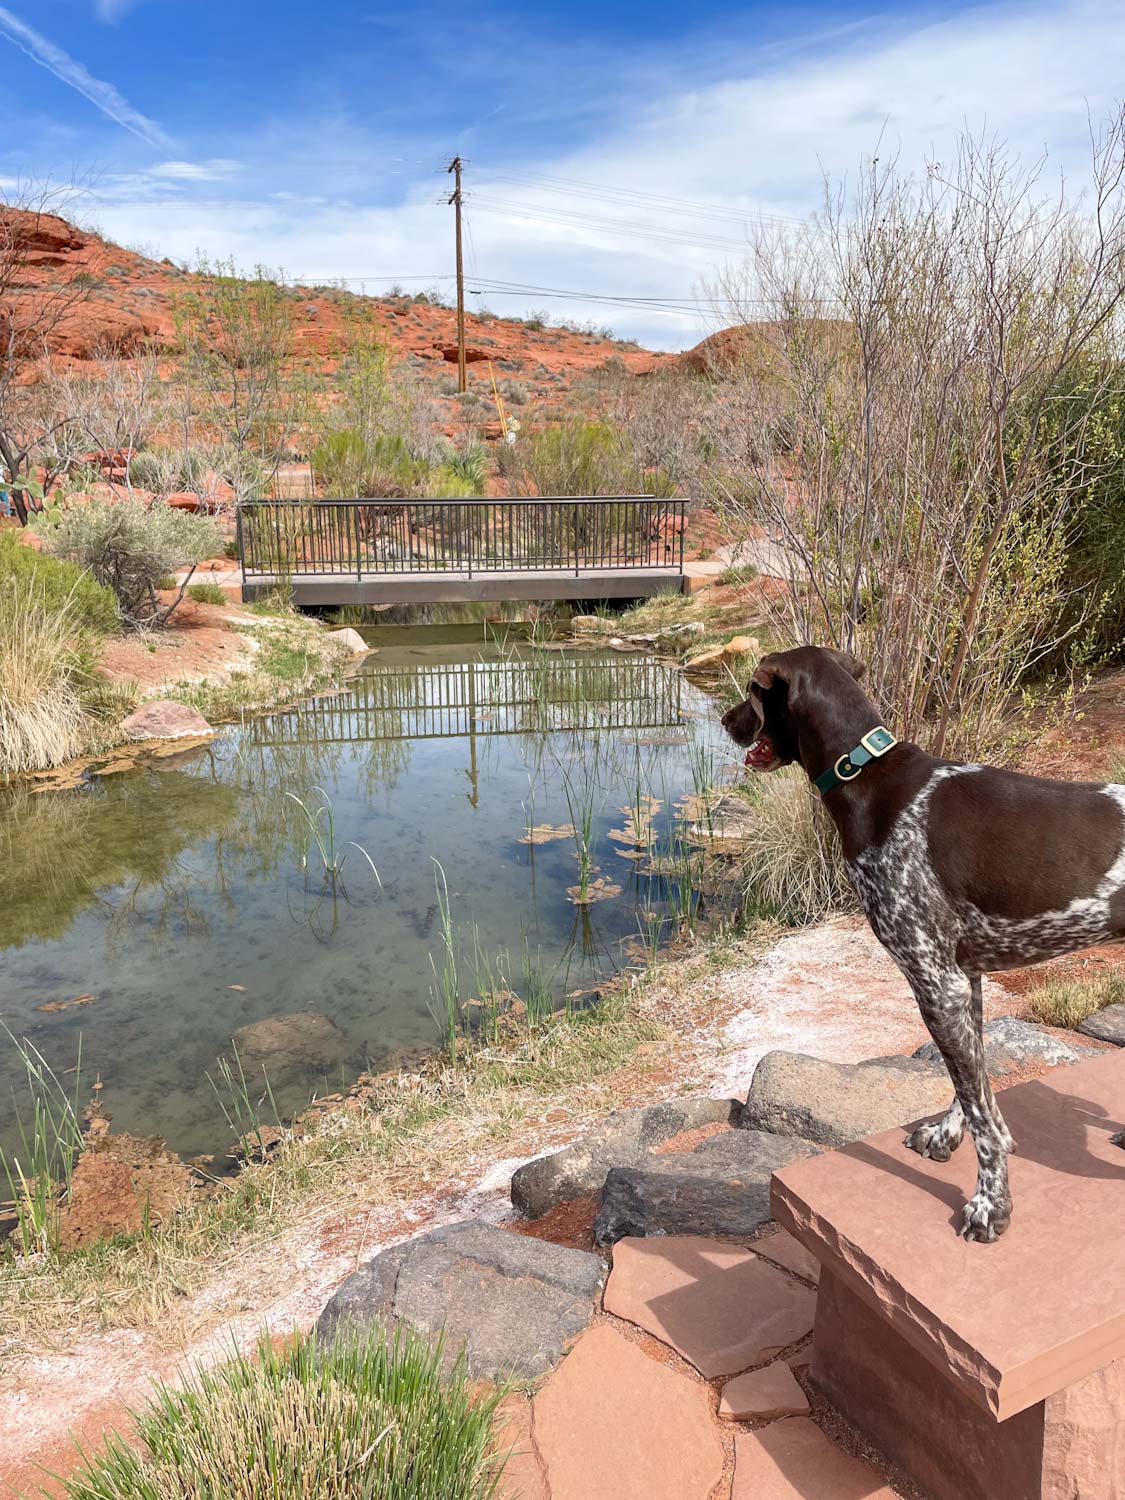 Dog looking at a small pond at Red Hills Desert Garden